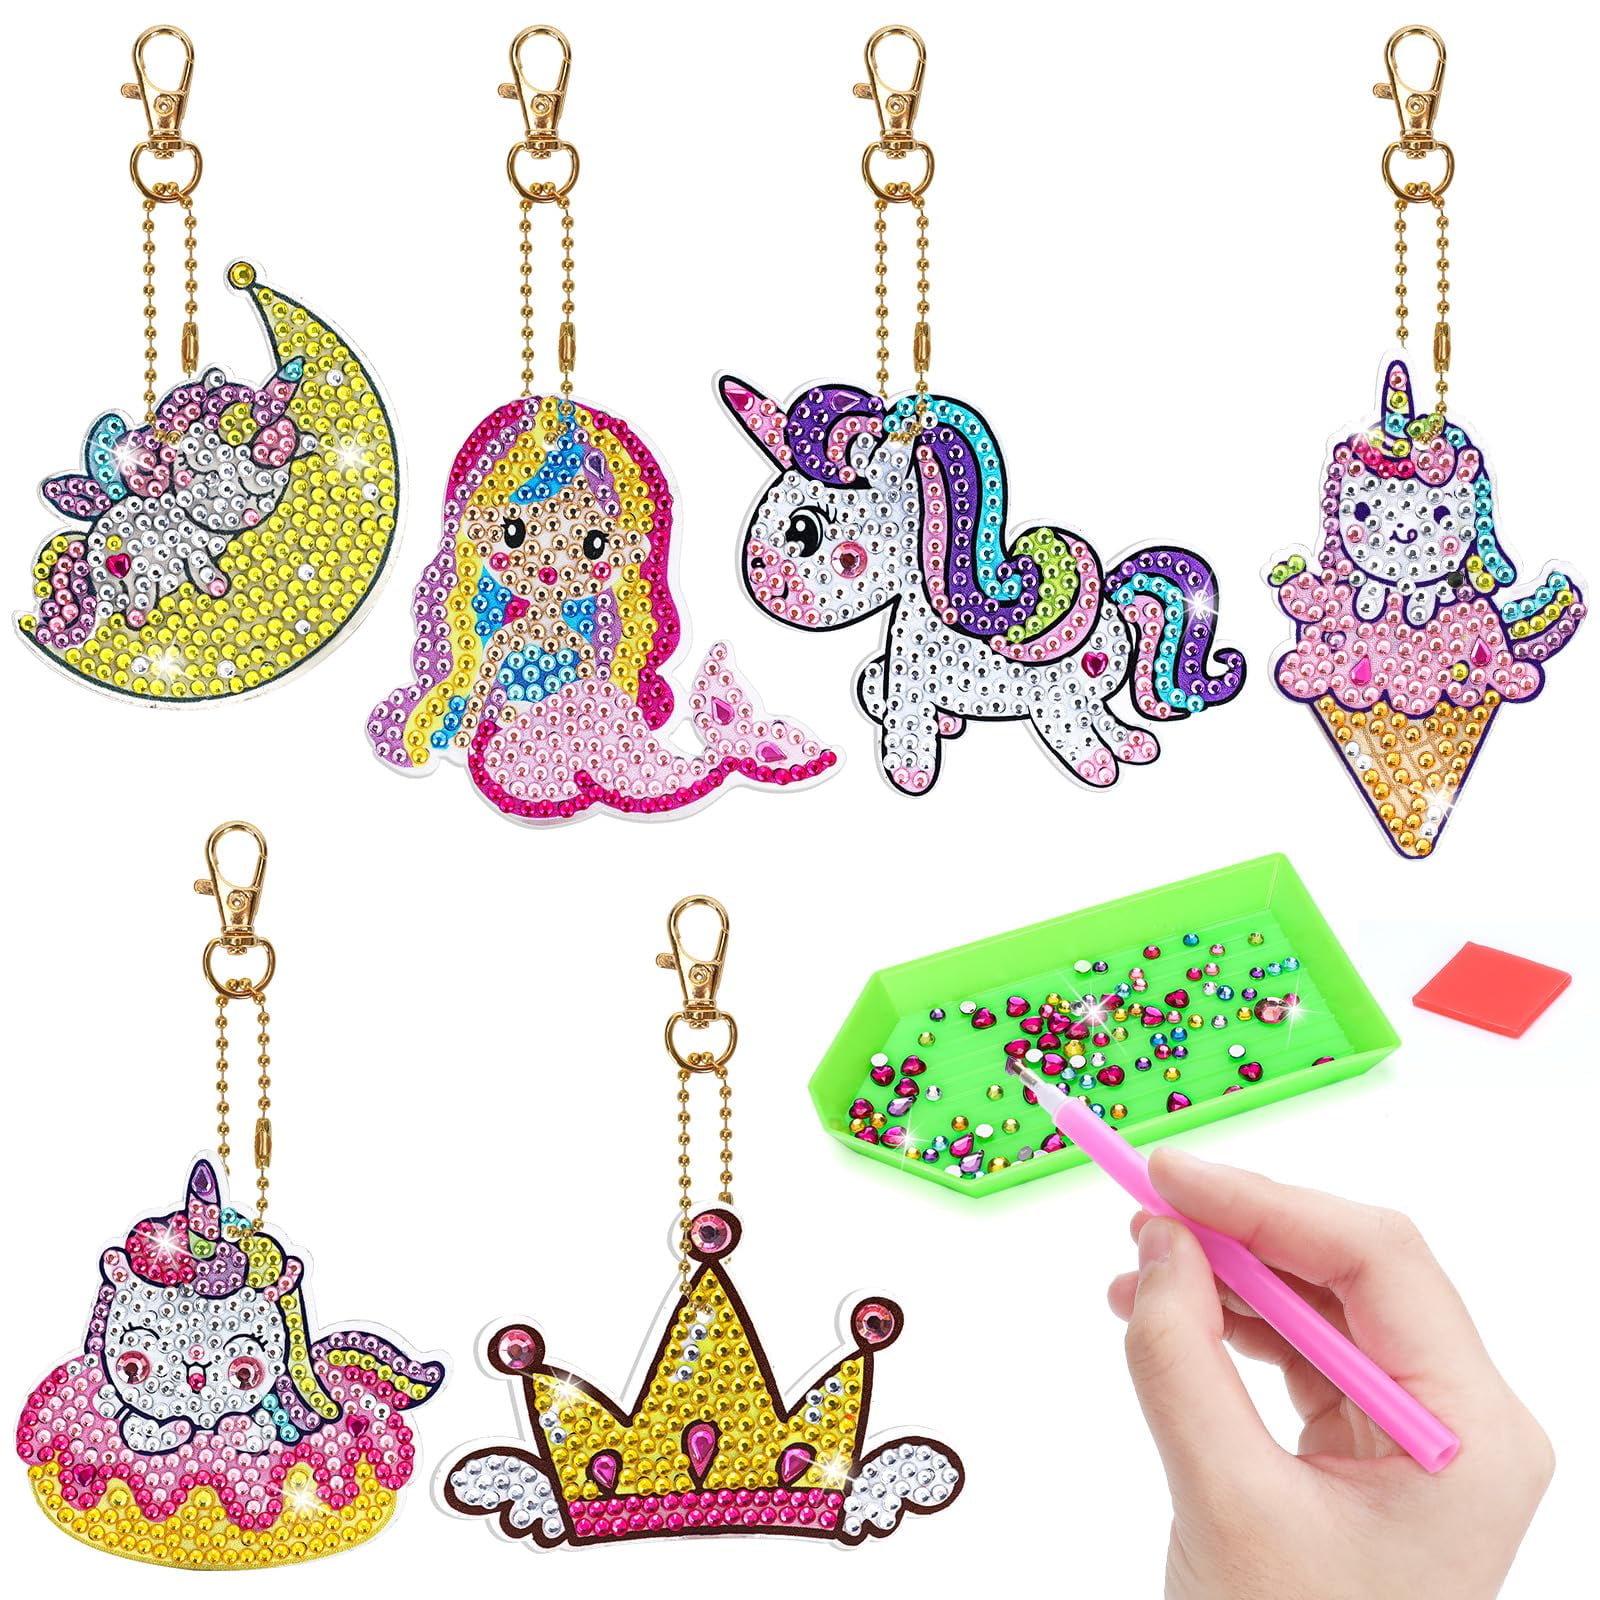 SUNNYPIG Gifts for 9 10 11 Year Old Girls, Diamond Art Kit for Kid Age 8 9  10 Unicorn Presents Arts and Crafts for Kids Teenage Girl Toys Gifts Age